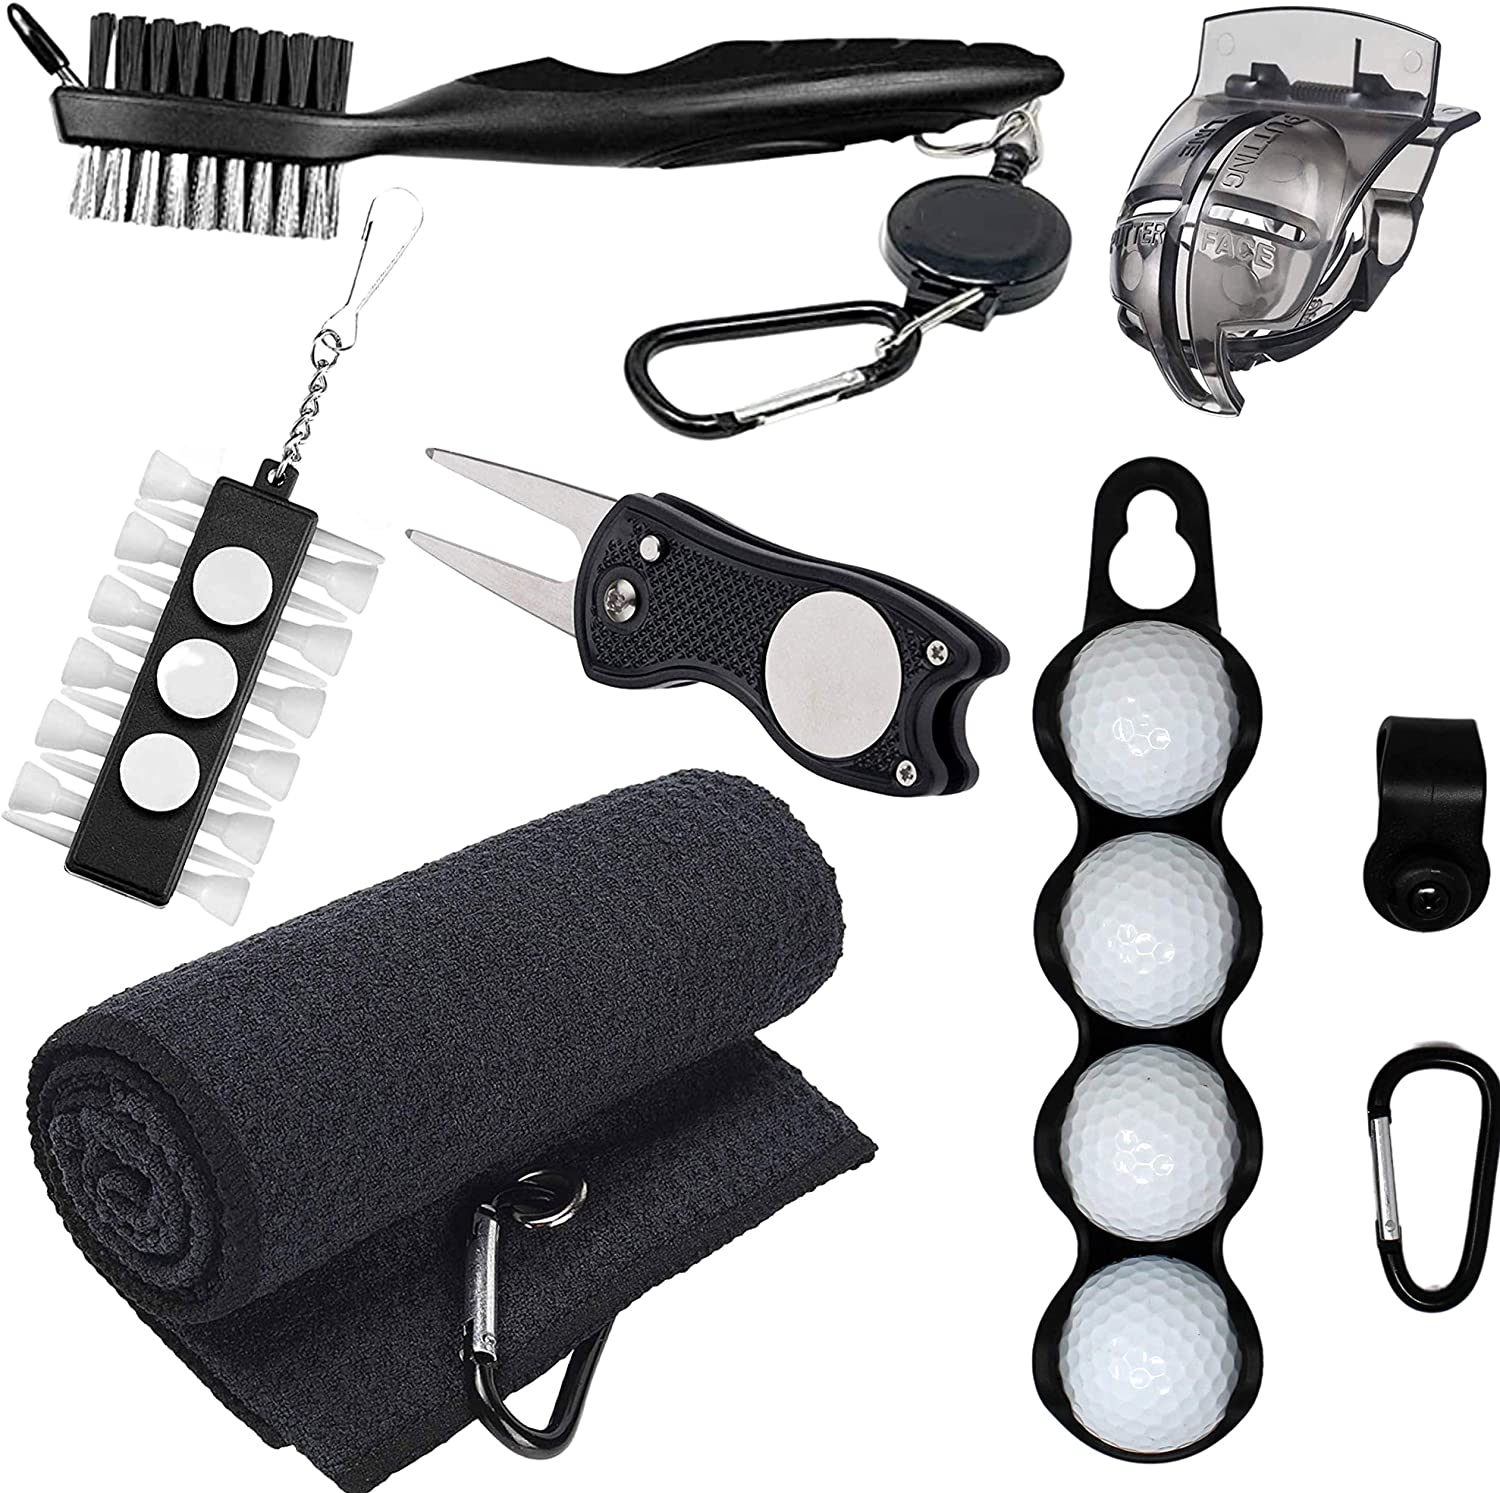 RE GOODS Golf Accessories Kit - Includes Towel, Ball Holder, Brush, Divot  Repair Tool, 2 Ball Alignment Stencil, Tee Holder, Putting Marker